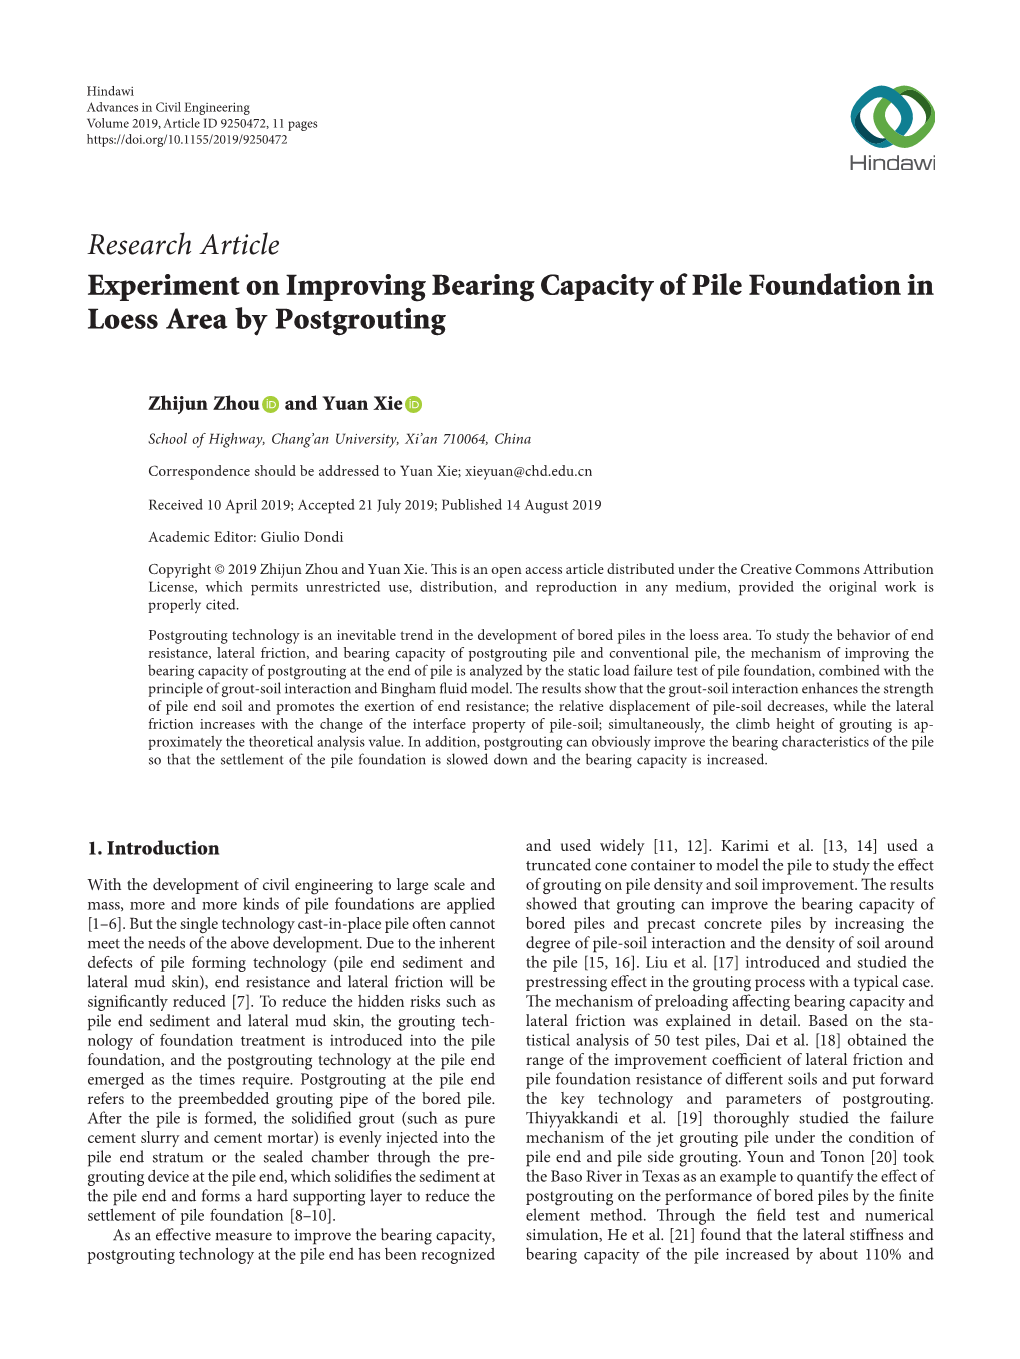 Research Article Experiment on Improving Bearing Capacity of Pile Foundation in Loess Area by Postgrouting